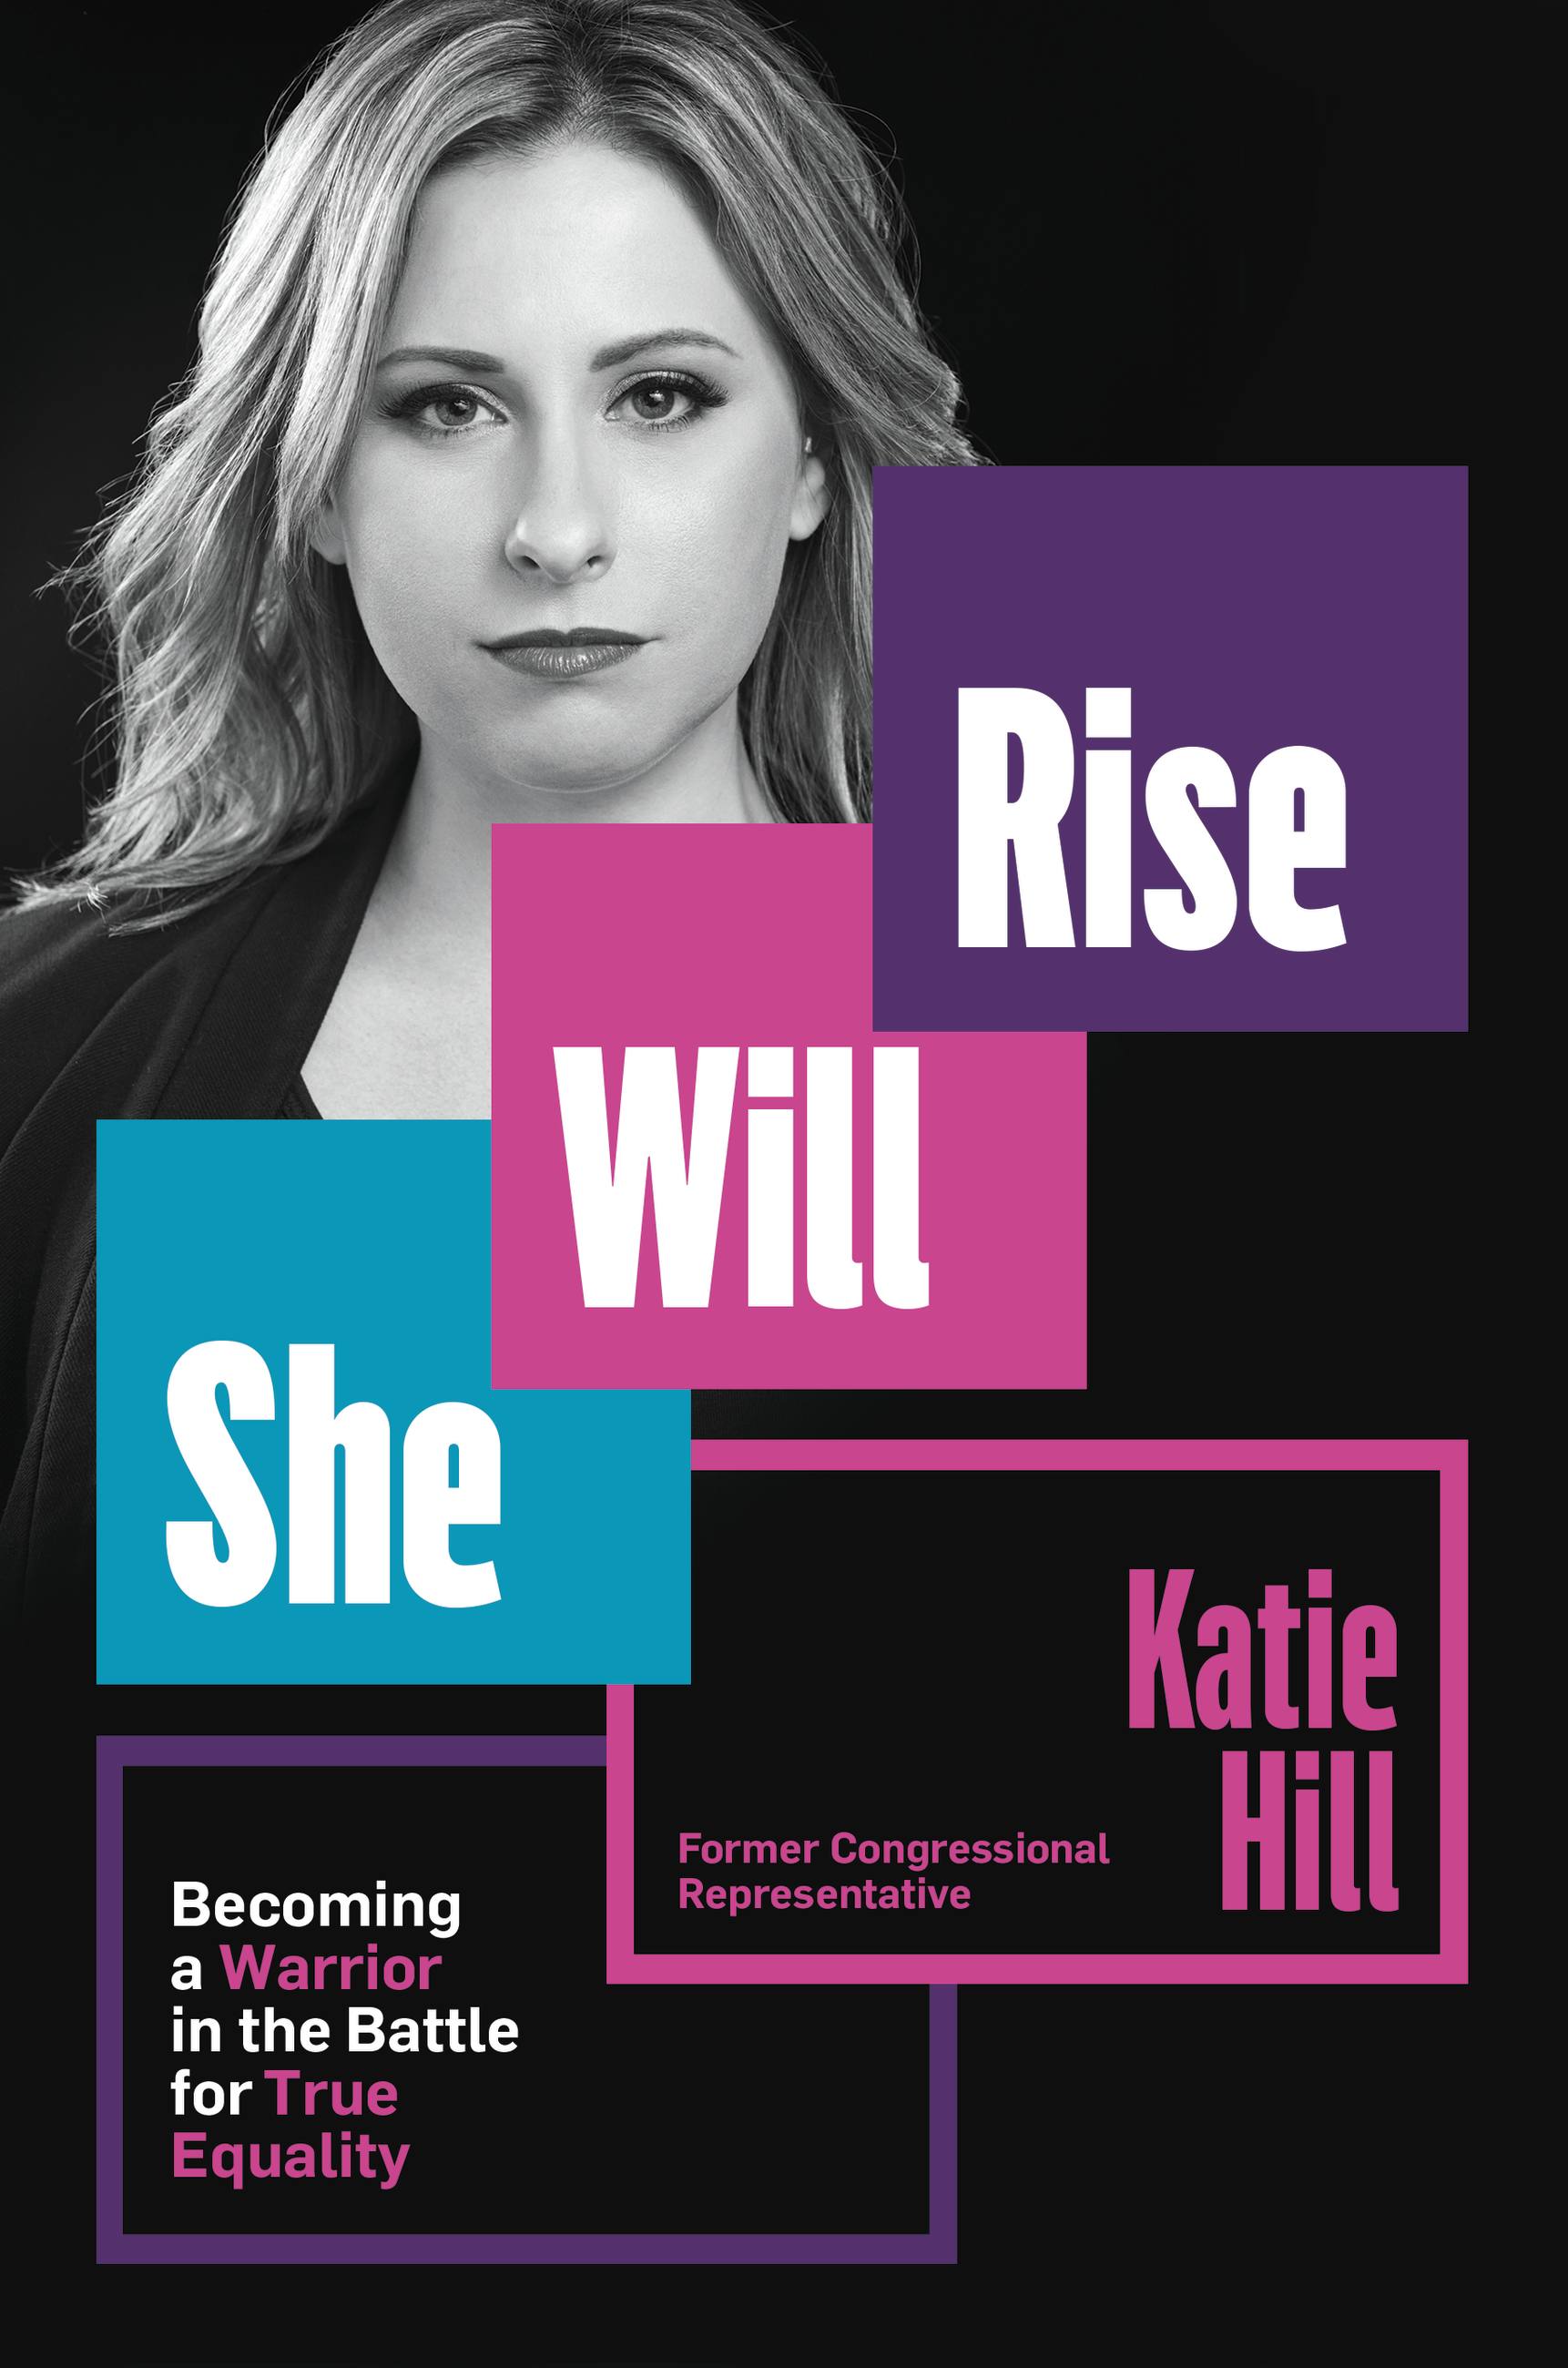 Husbands Boss Blackmail Porn Video - She Will Rise by Katie Hill | Hachette Book Group